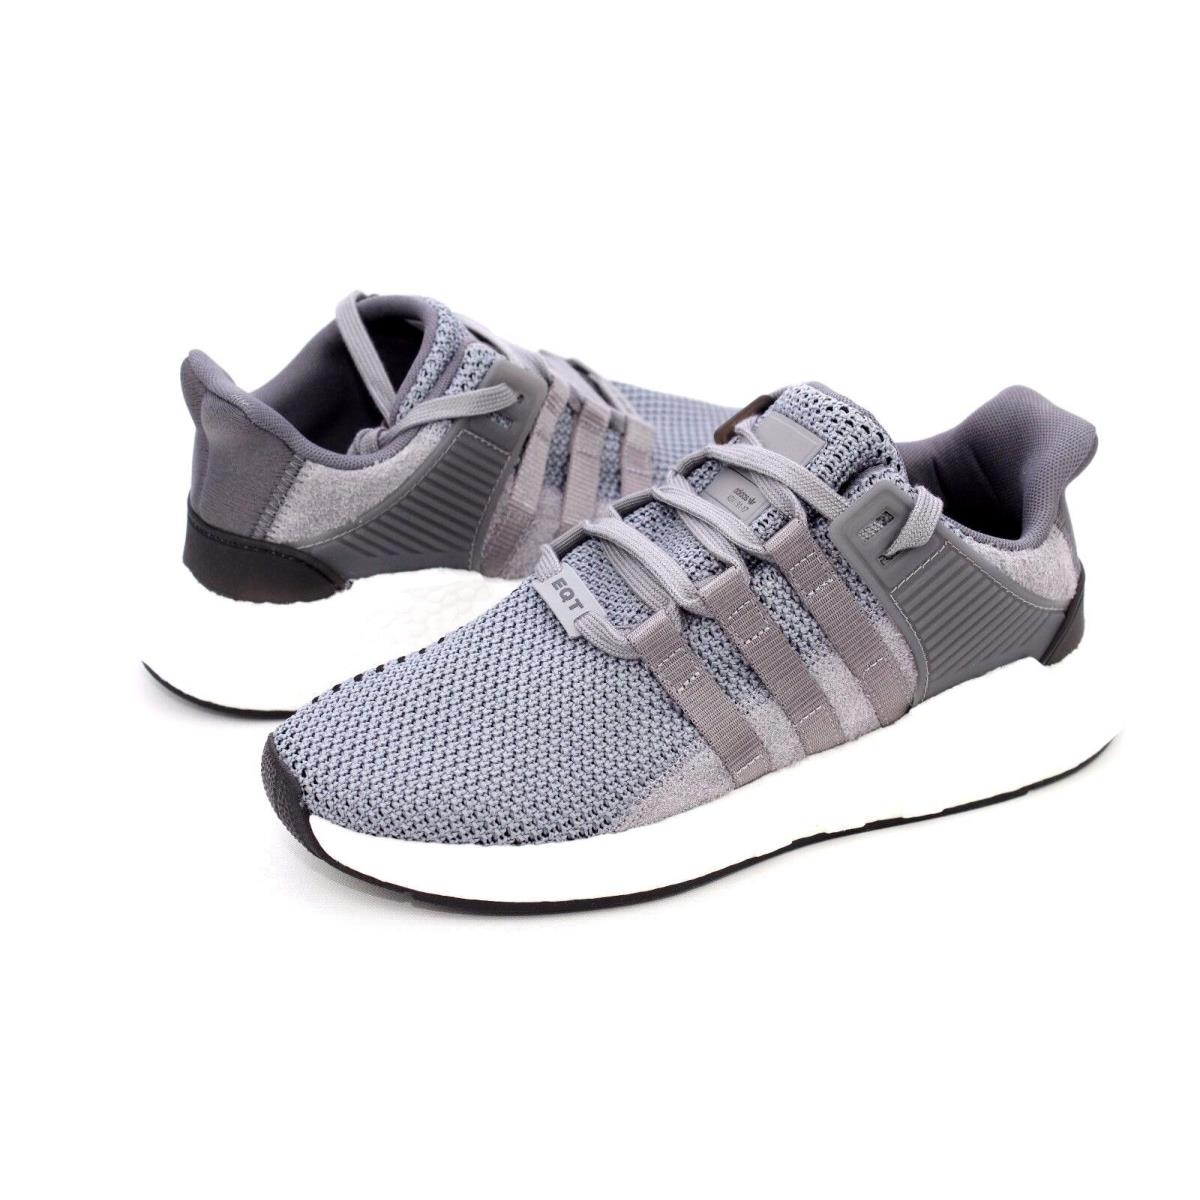 Adidas Eqt Boost Support 93/17 BY9511 Grey Grey White Men`s Size 7